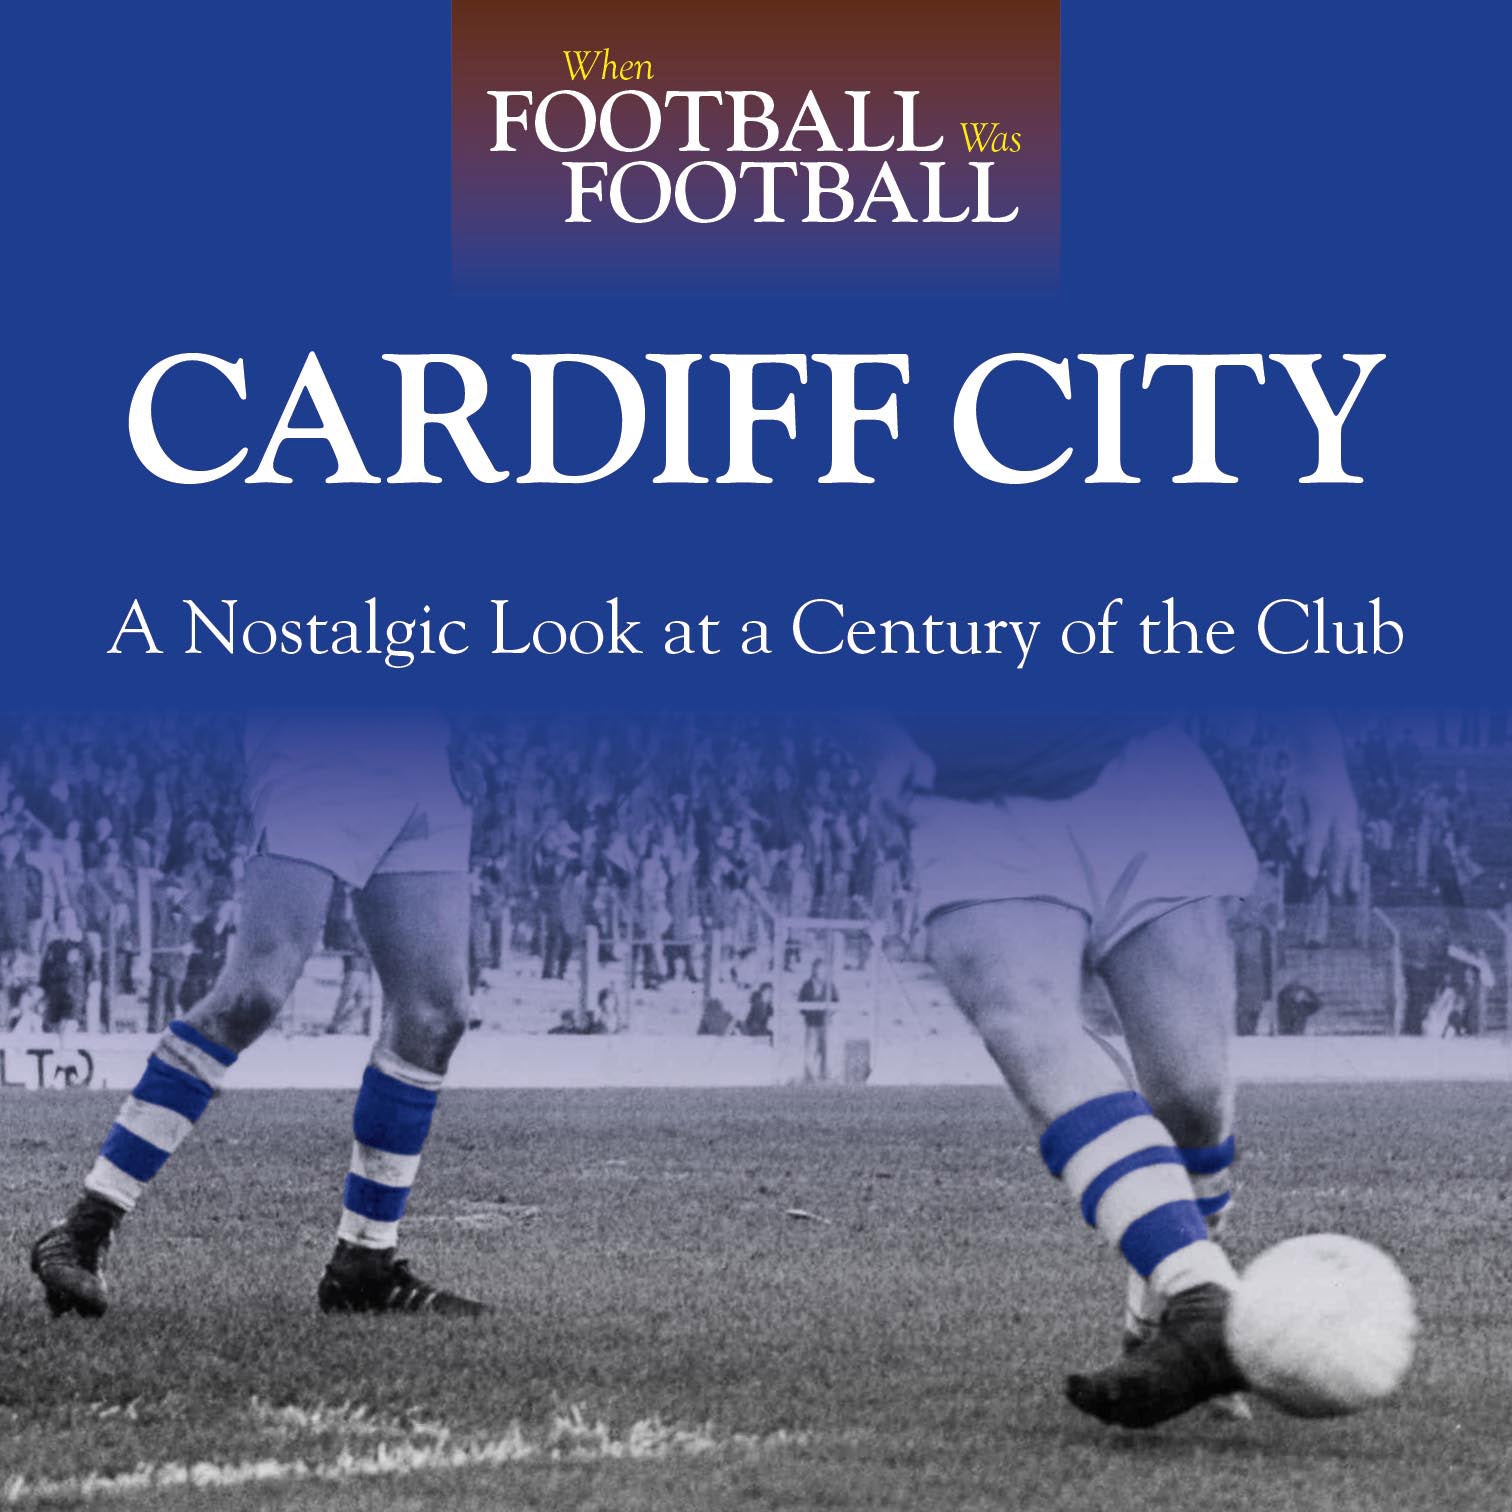 When Football Was Football – Cardiff City – A Nostalgic Look at a Century of the Club